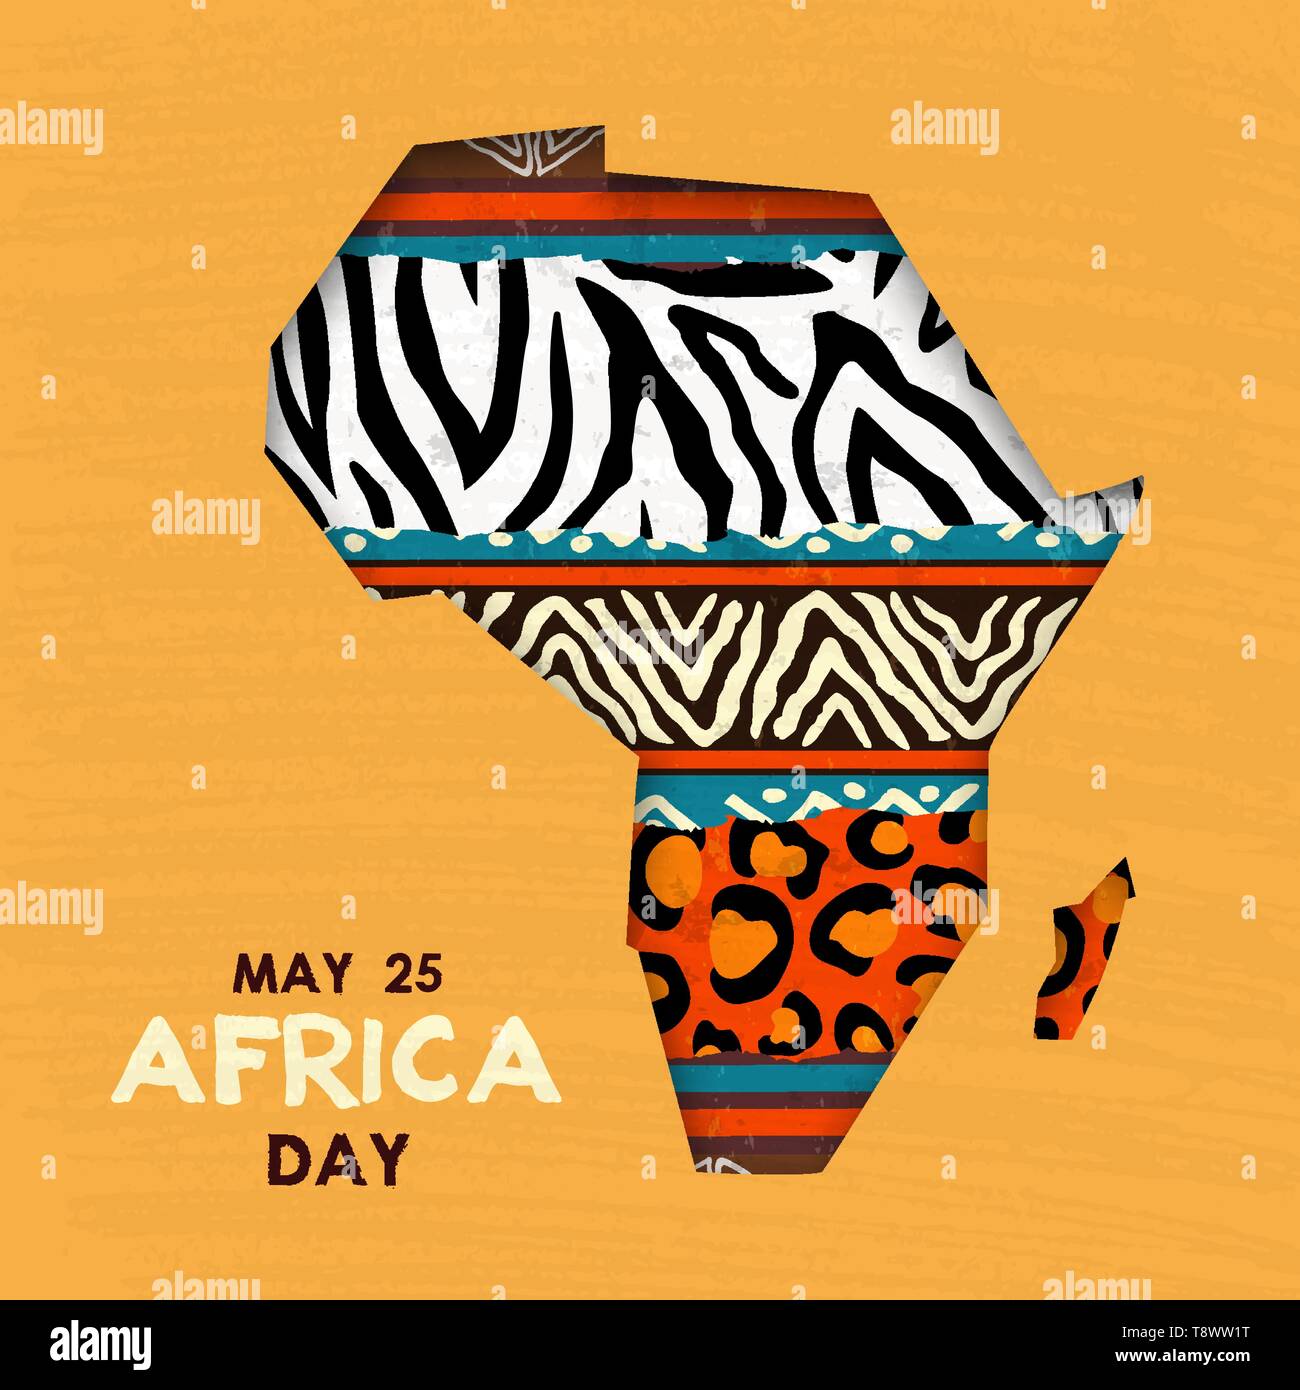 Africa Day greeting card illustration for 25 may celebration. African